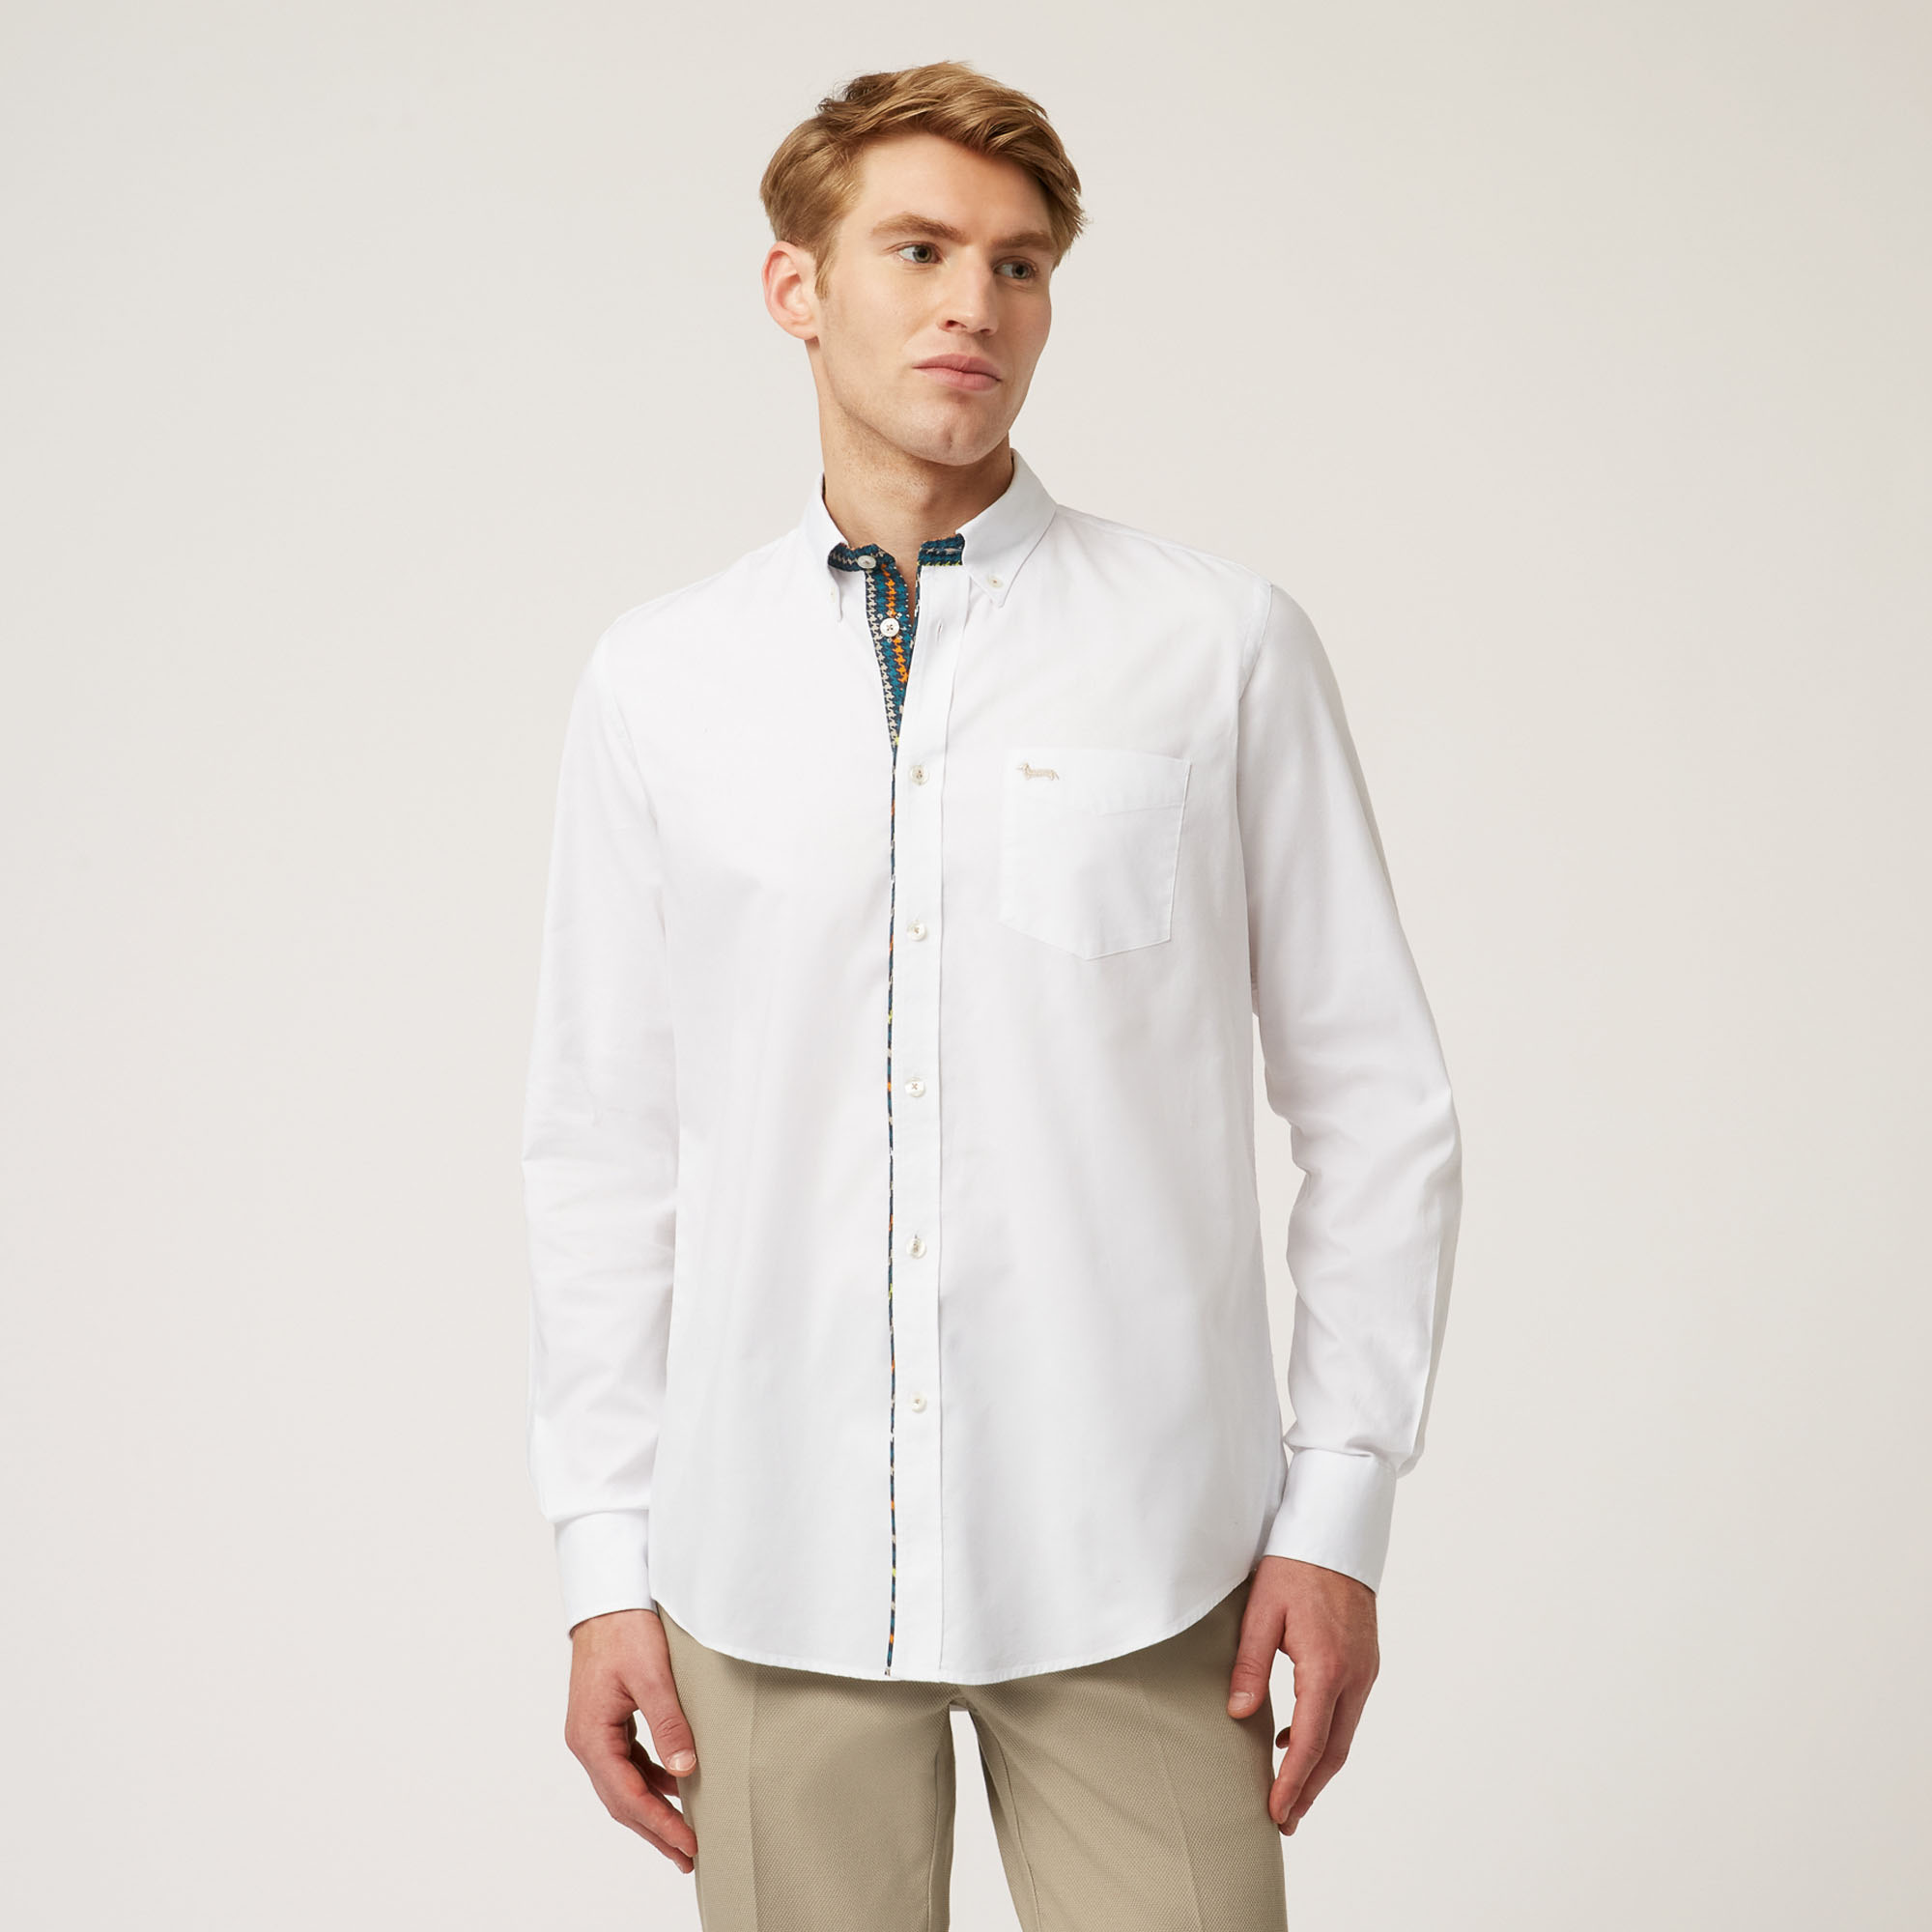 Shirt With Contrasting Detail And Small Pocket, White, large